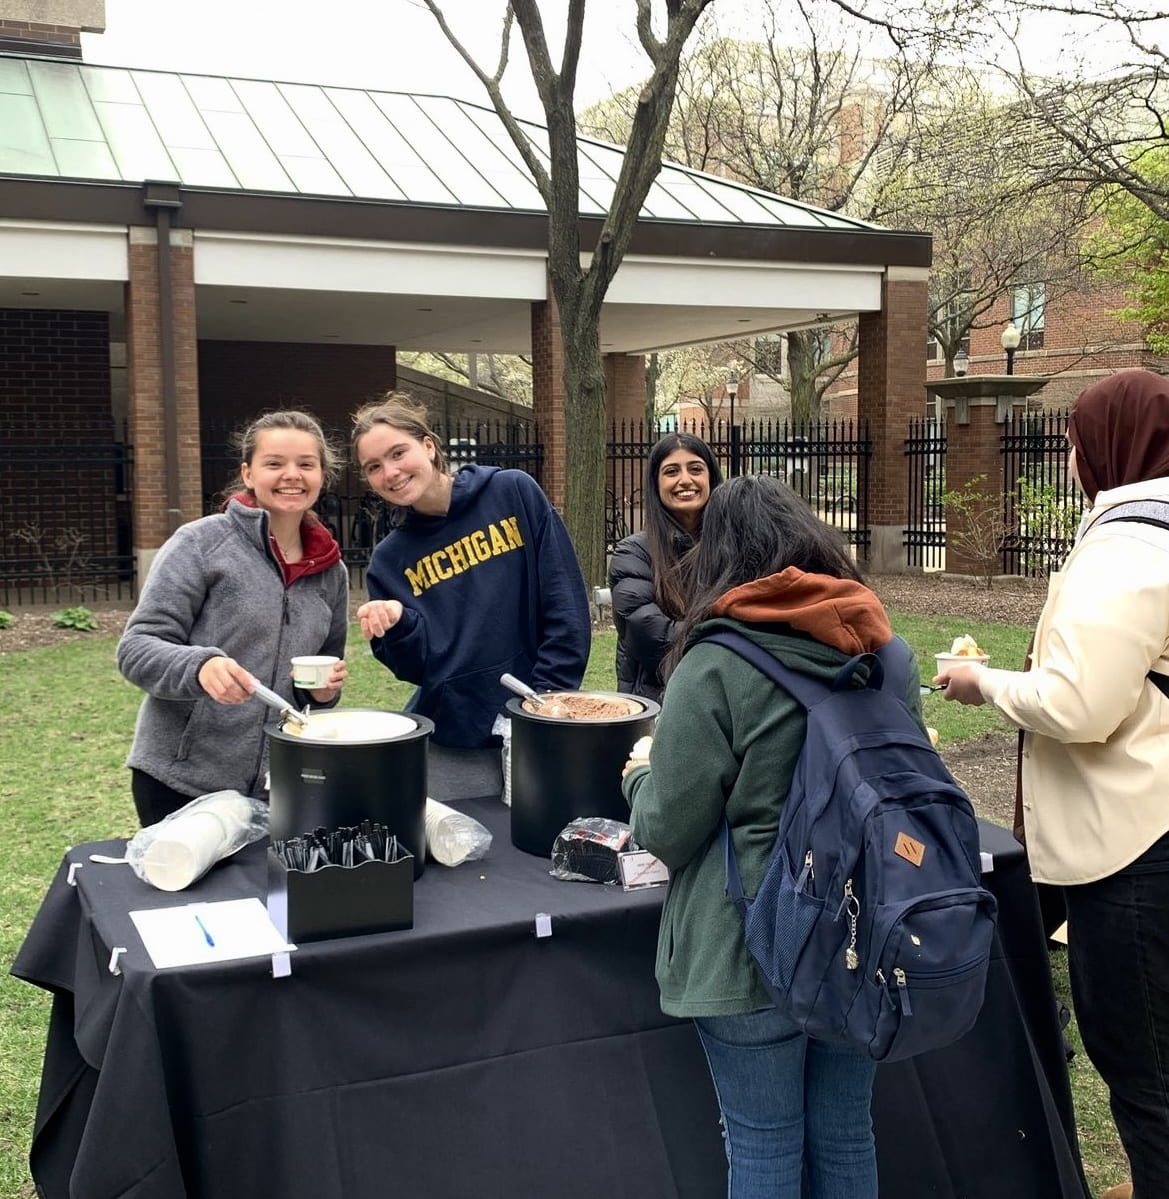 A group of Pathways Honors students serving themselves ice cream at an outdoor table in a courtyard. Two students face the camera and smile.